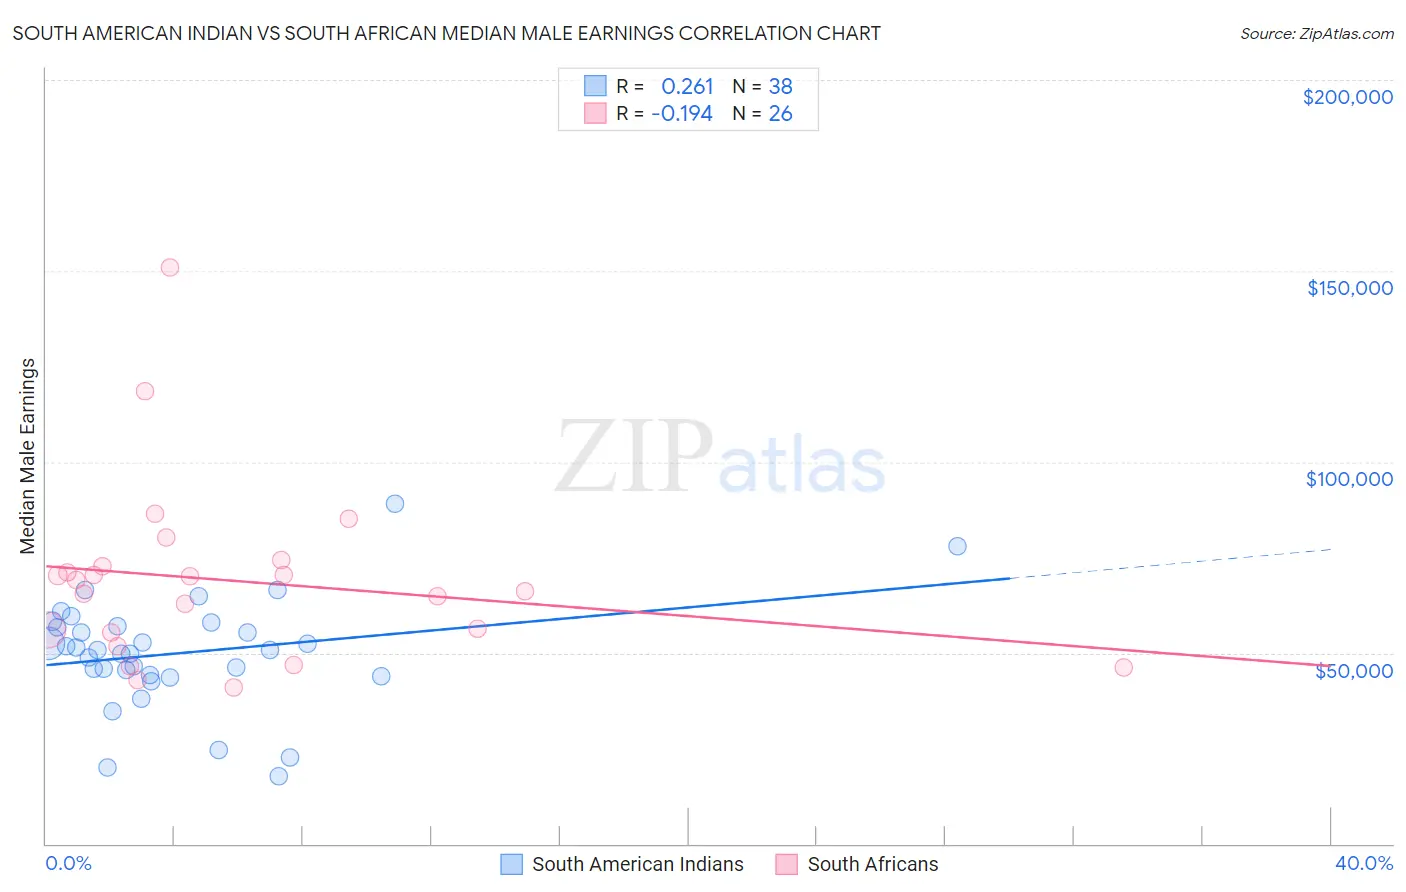 South American Indian vs South African Median Male Earnings